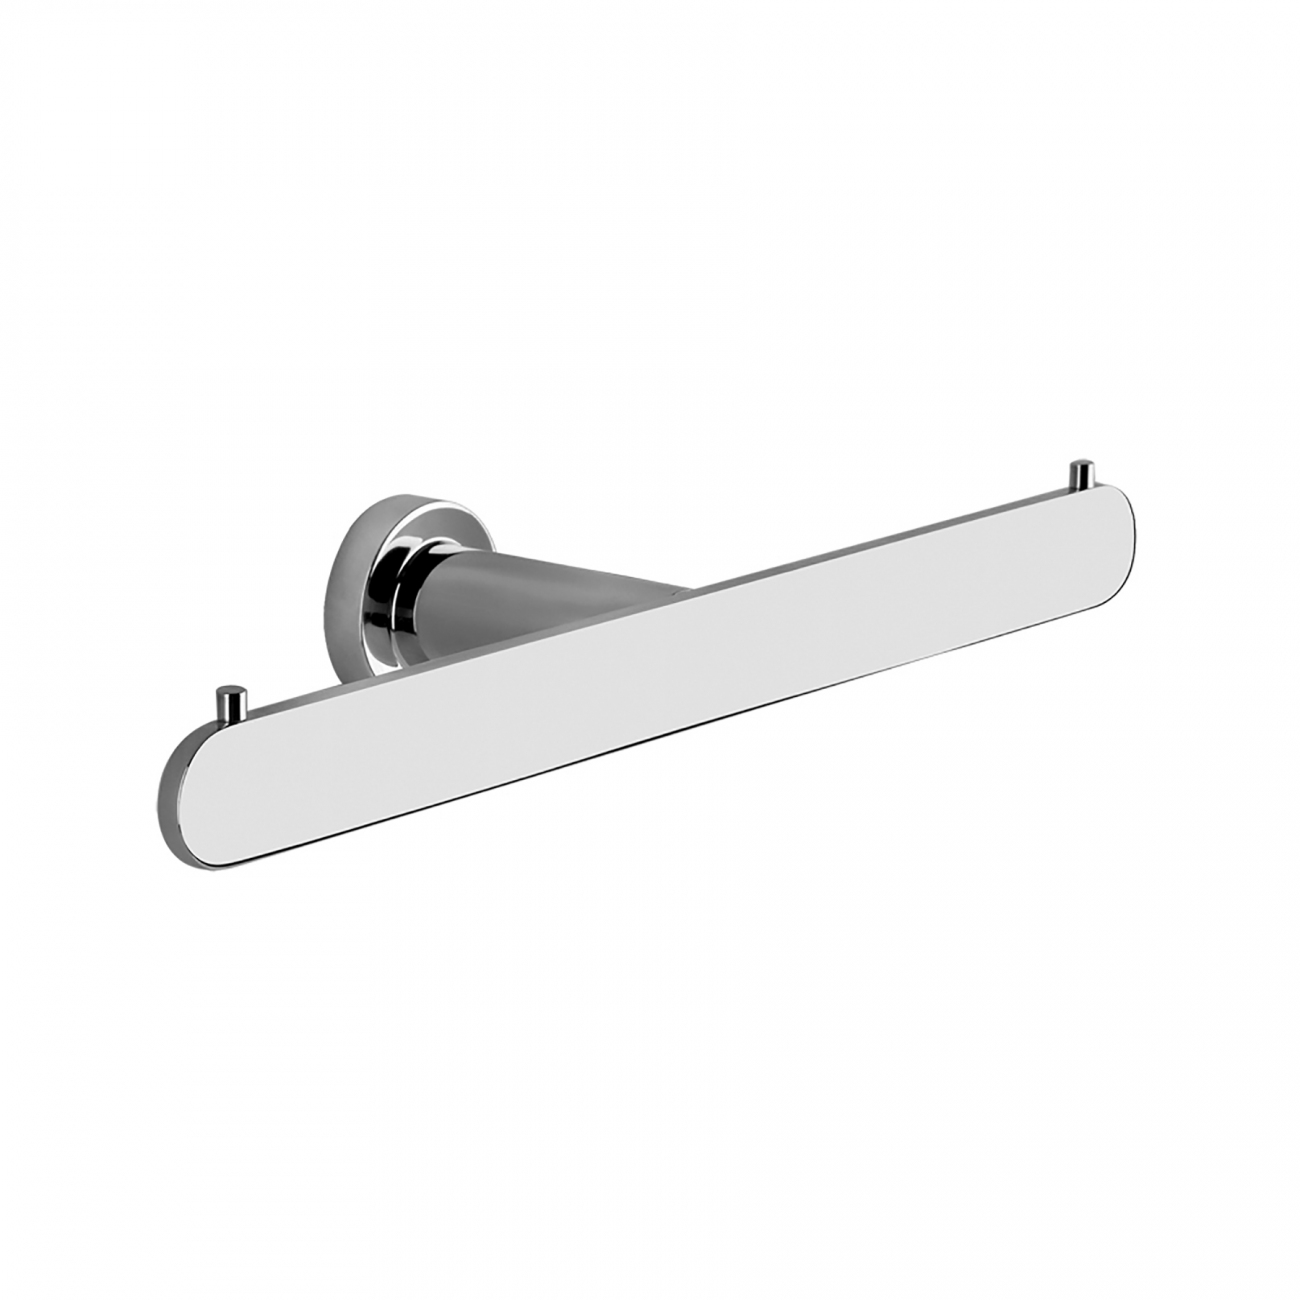 Gessi Emporio wall-mounted tumbler holder GESSI CHROME 031